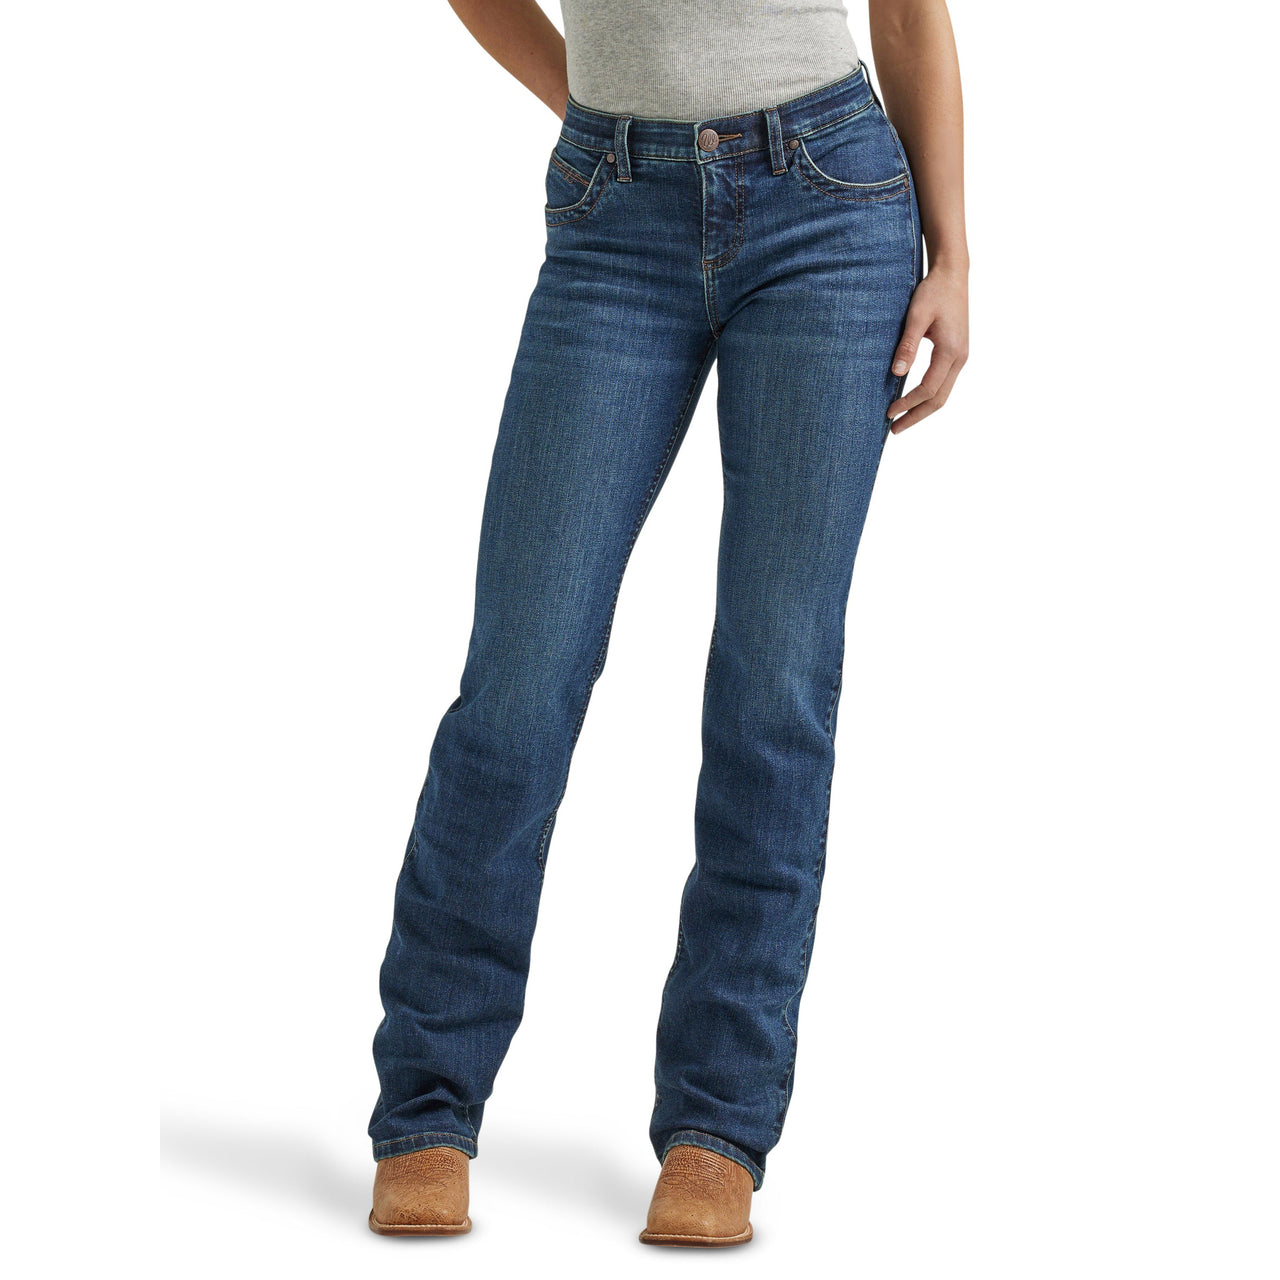 Wrangler Women's Ultimate Riding Q-Baby Bootcut Jeans - Amy